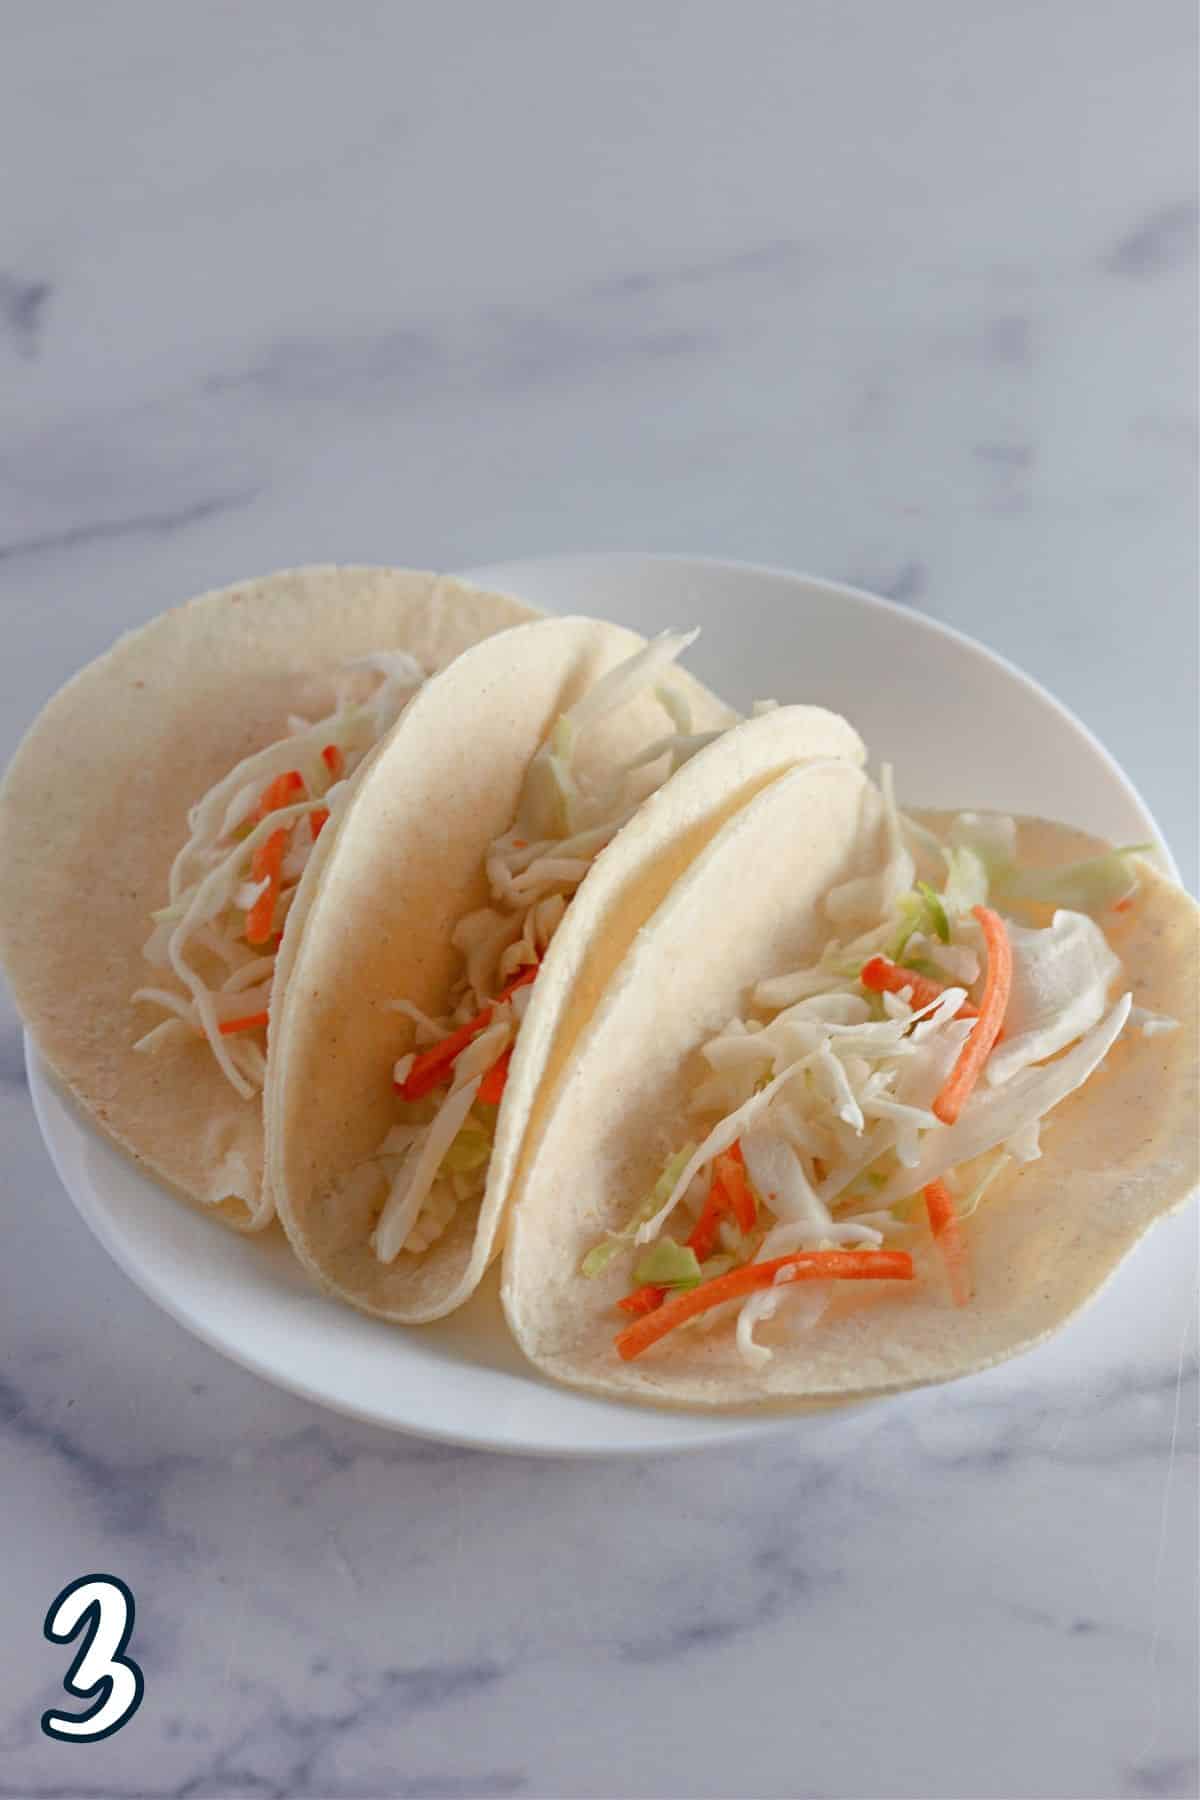 Cabbage slaw placed into corn taco shells.